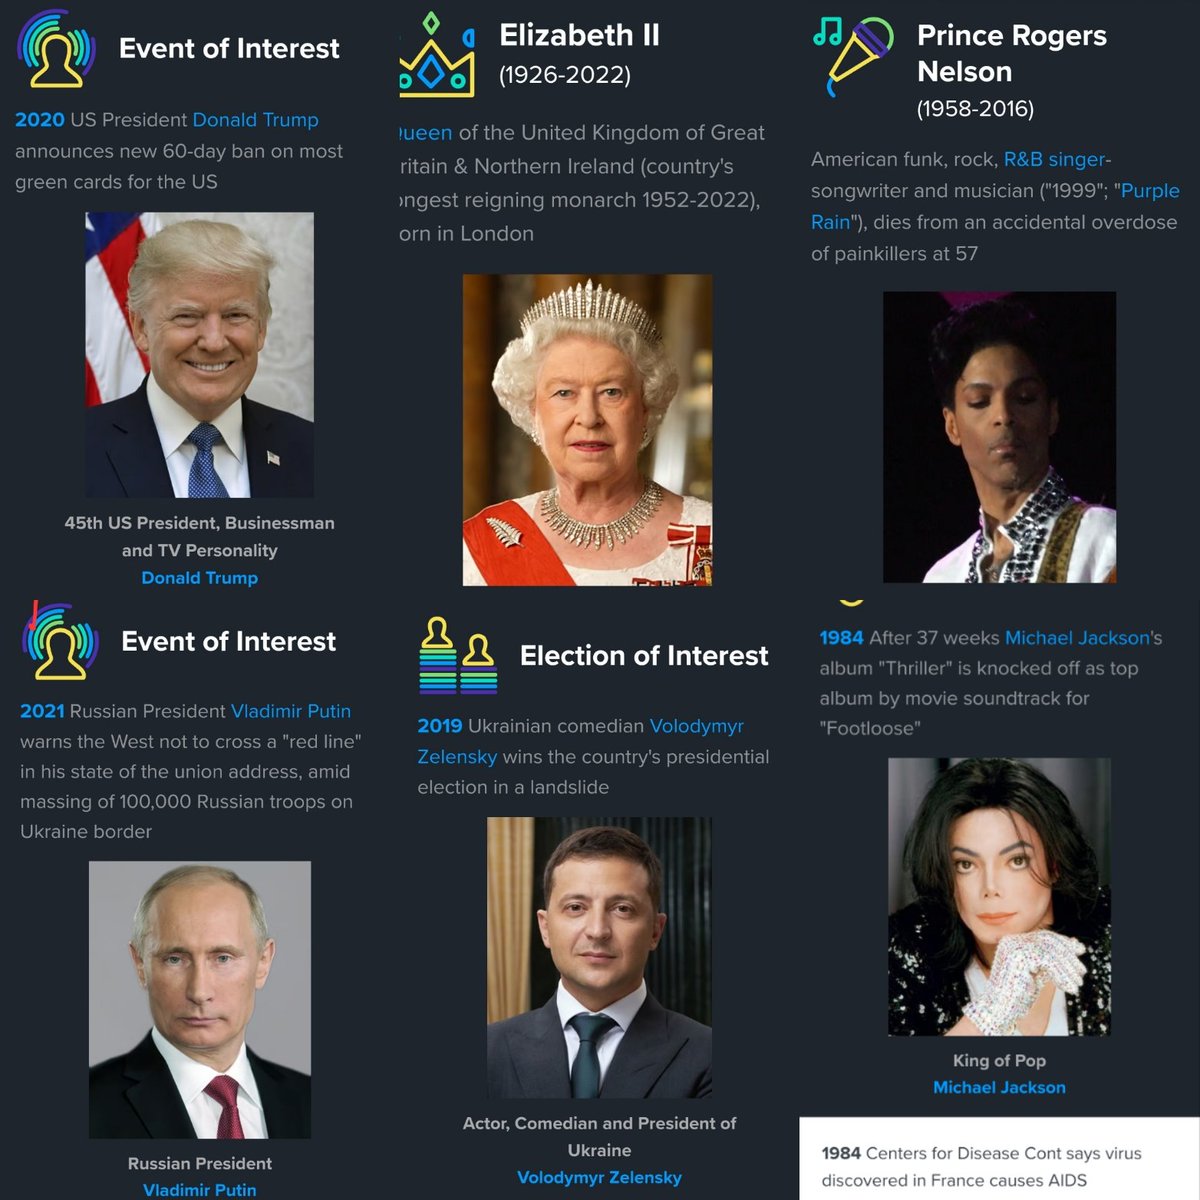 SUNDAY FUNDAY COMING UP‼️

💥QUEEN ELIZABETH II BIRTHDAY
💥THE DEATH OF PRINCE
💥THE ELECTION OF VOLODYMYR ZELENSKY 
💥TRUMP 'GREEN'
💥PUTIN 'RED'

IM SURE THAT IS PURELY COINCIDENCE 😏

NCSWIC👊